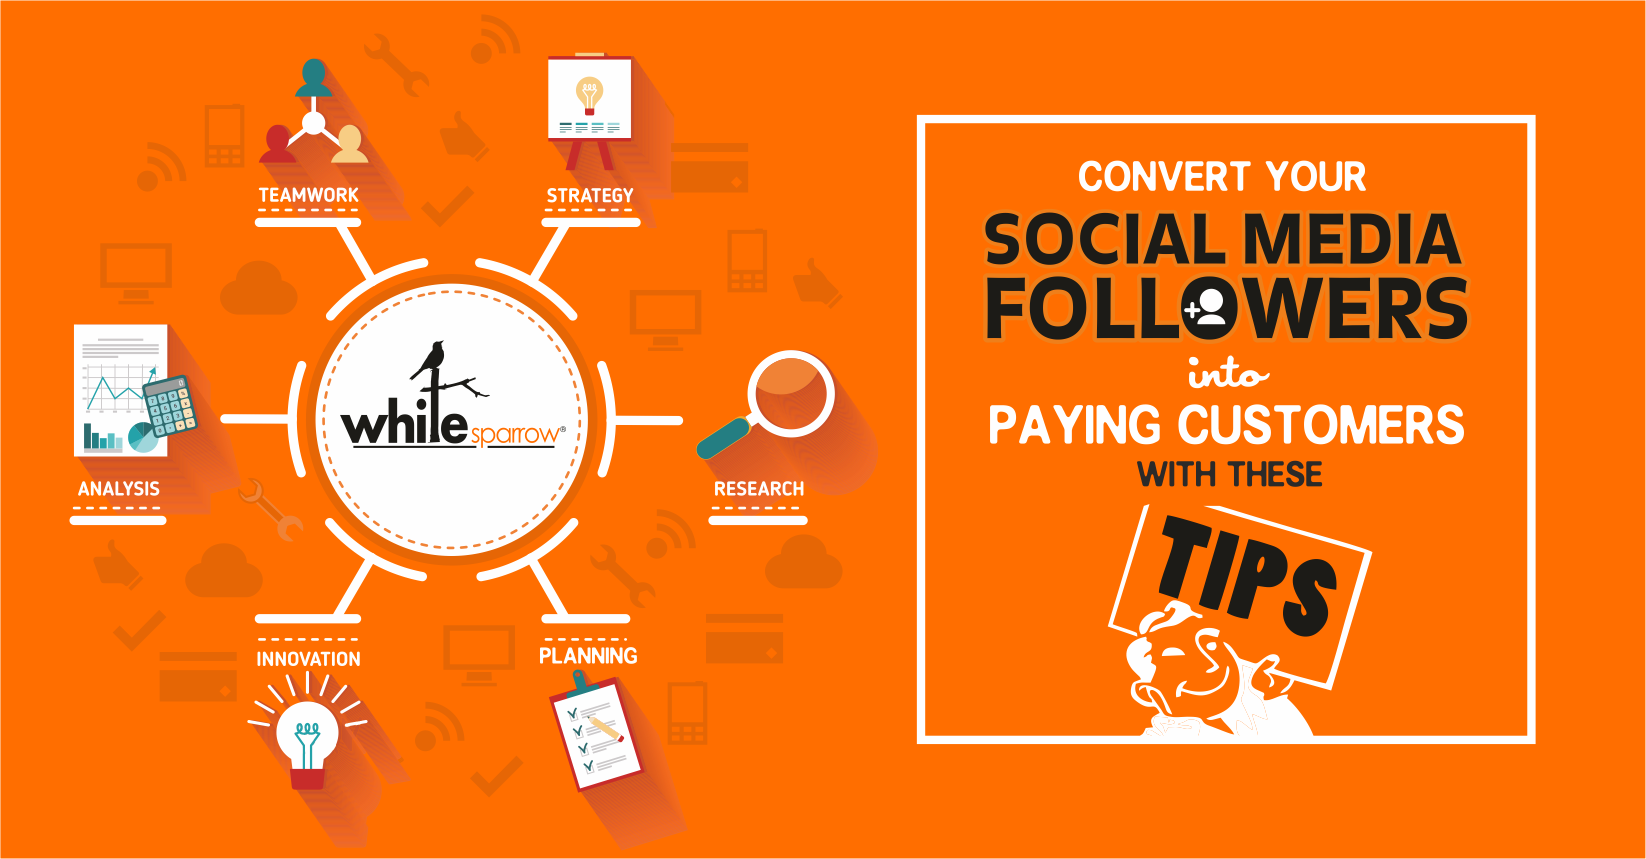 Convert your social media followers into paying customers with these tips.